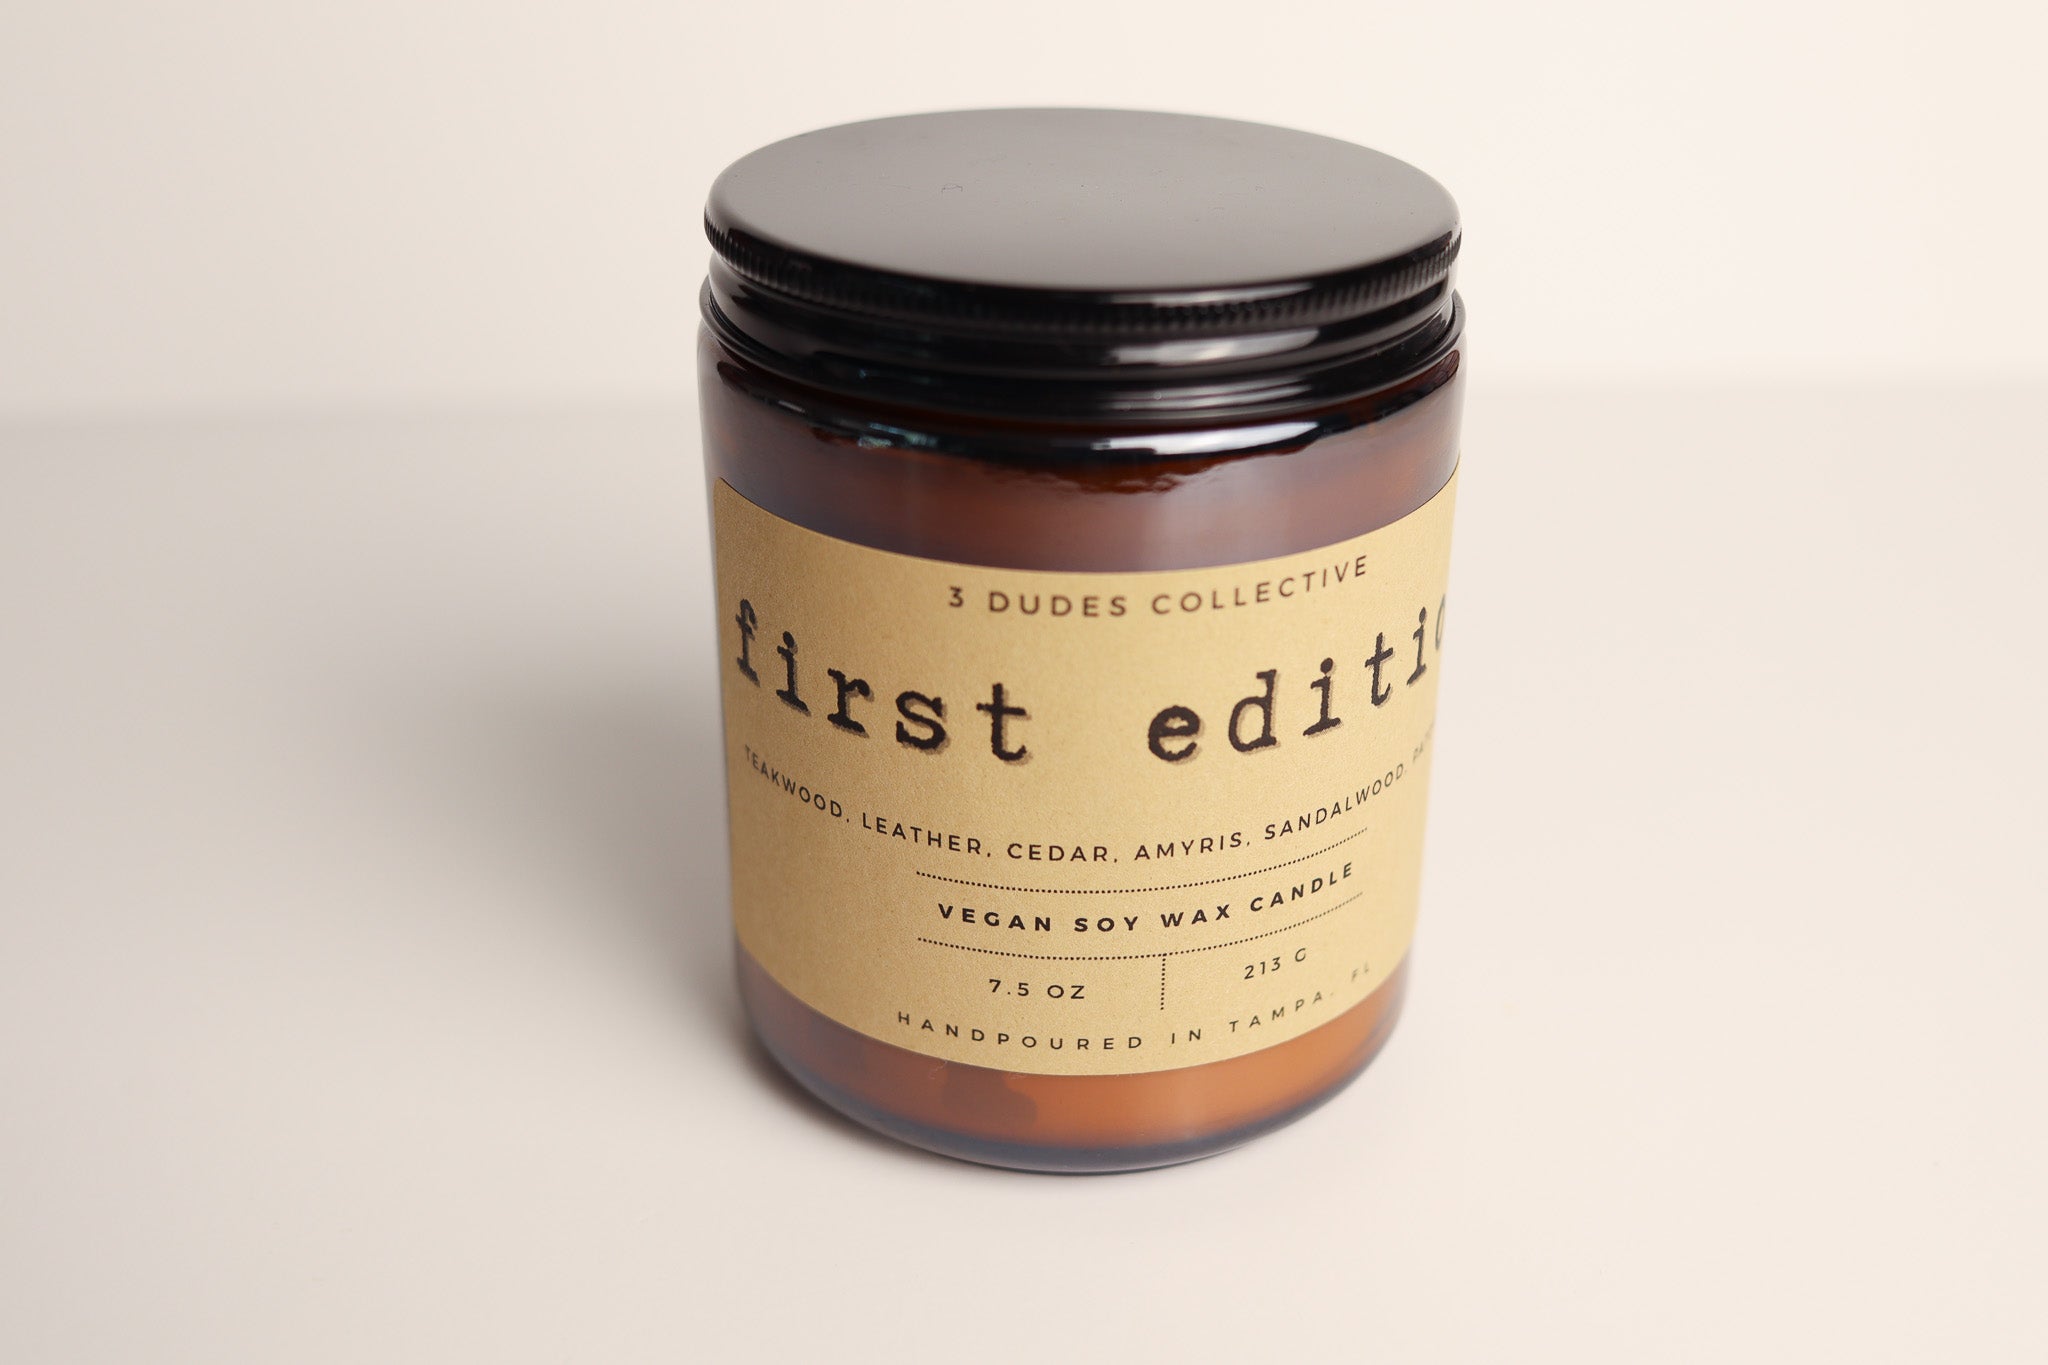 Rustic Glow Collection: First Edition Candle